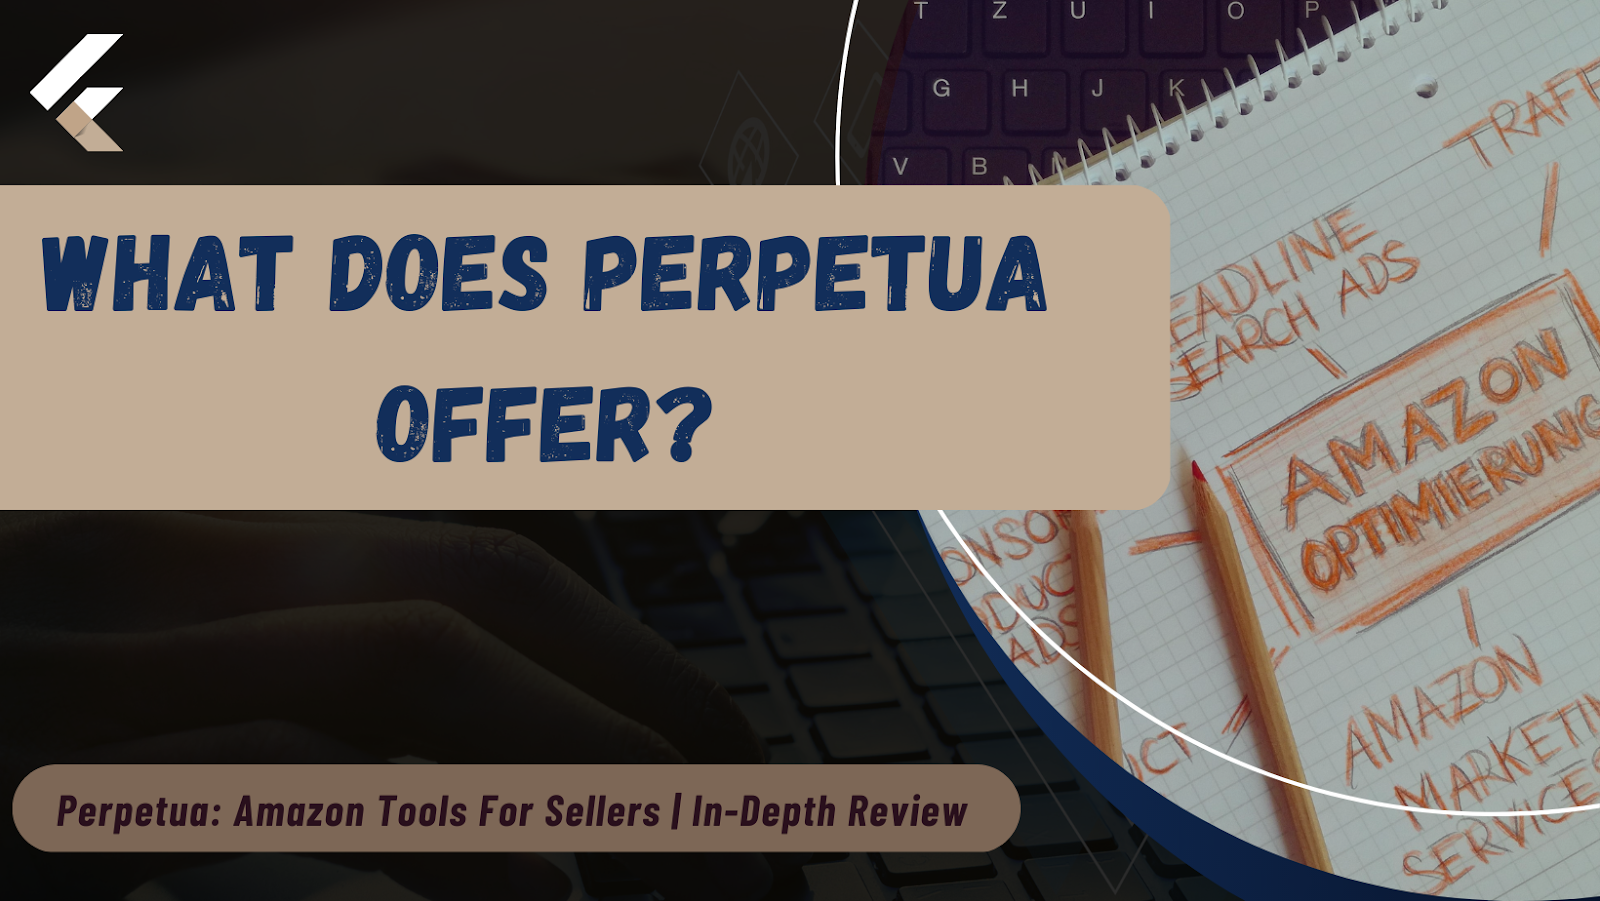 What Does Perpetua Offer?